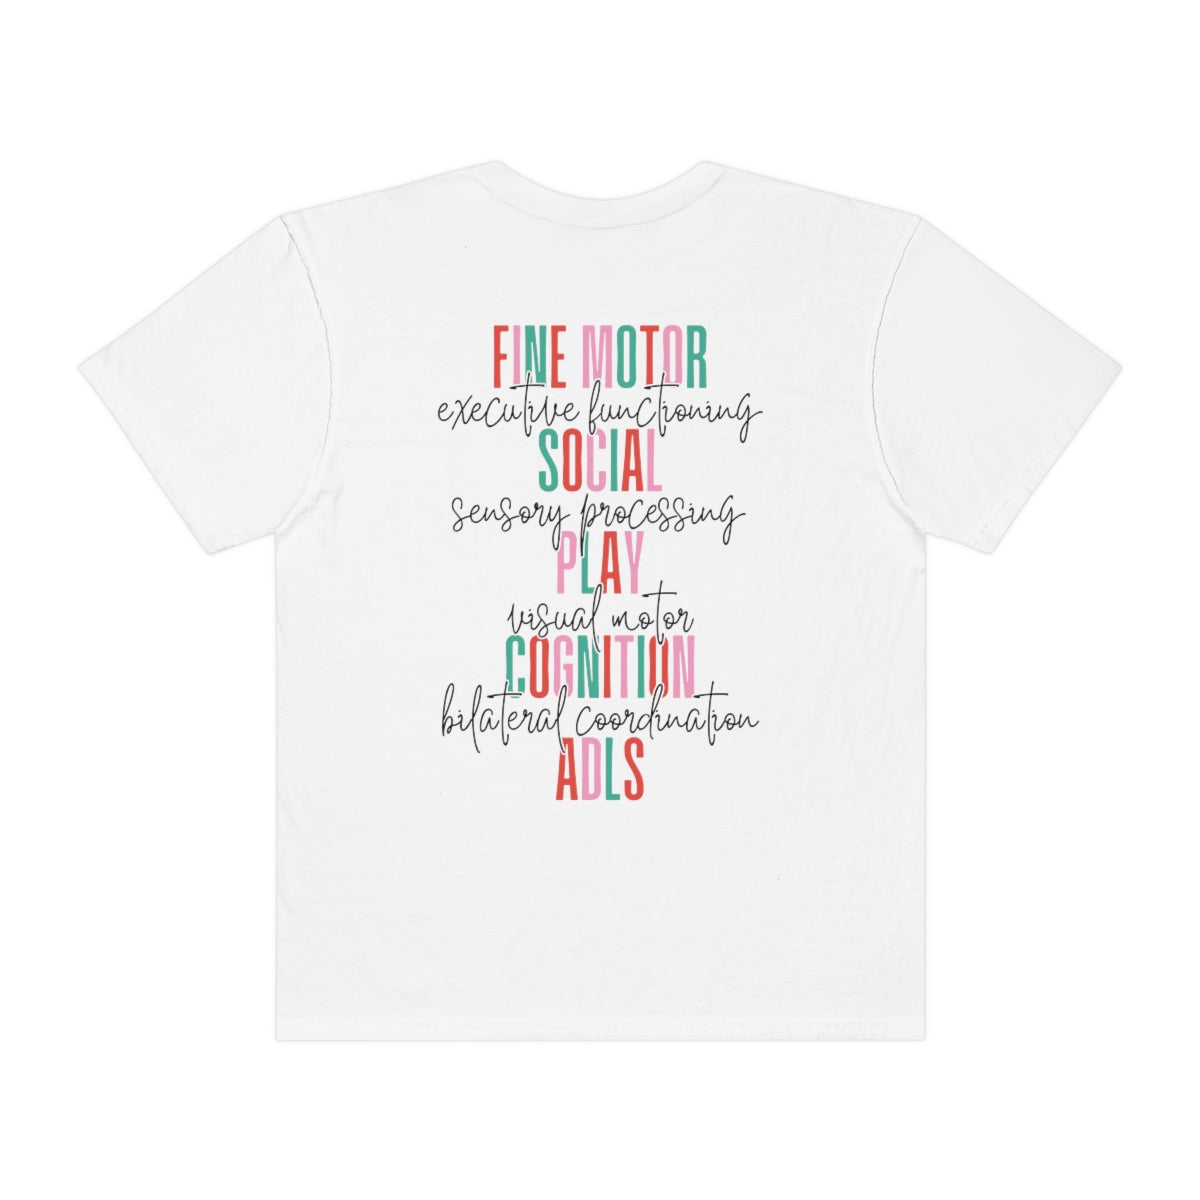 Merry Occupational Therapist Comfort Colors T-Shirt | Front and Back Print